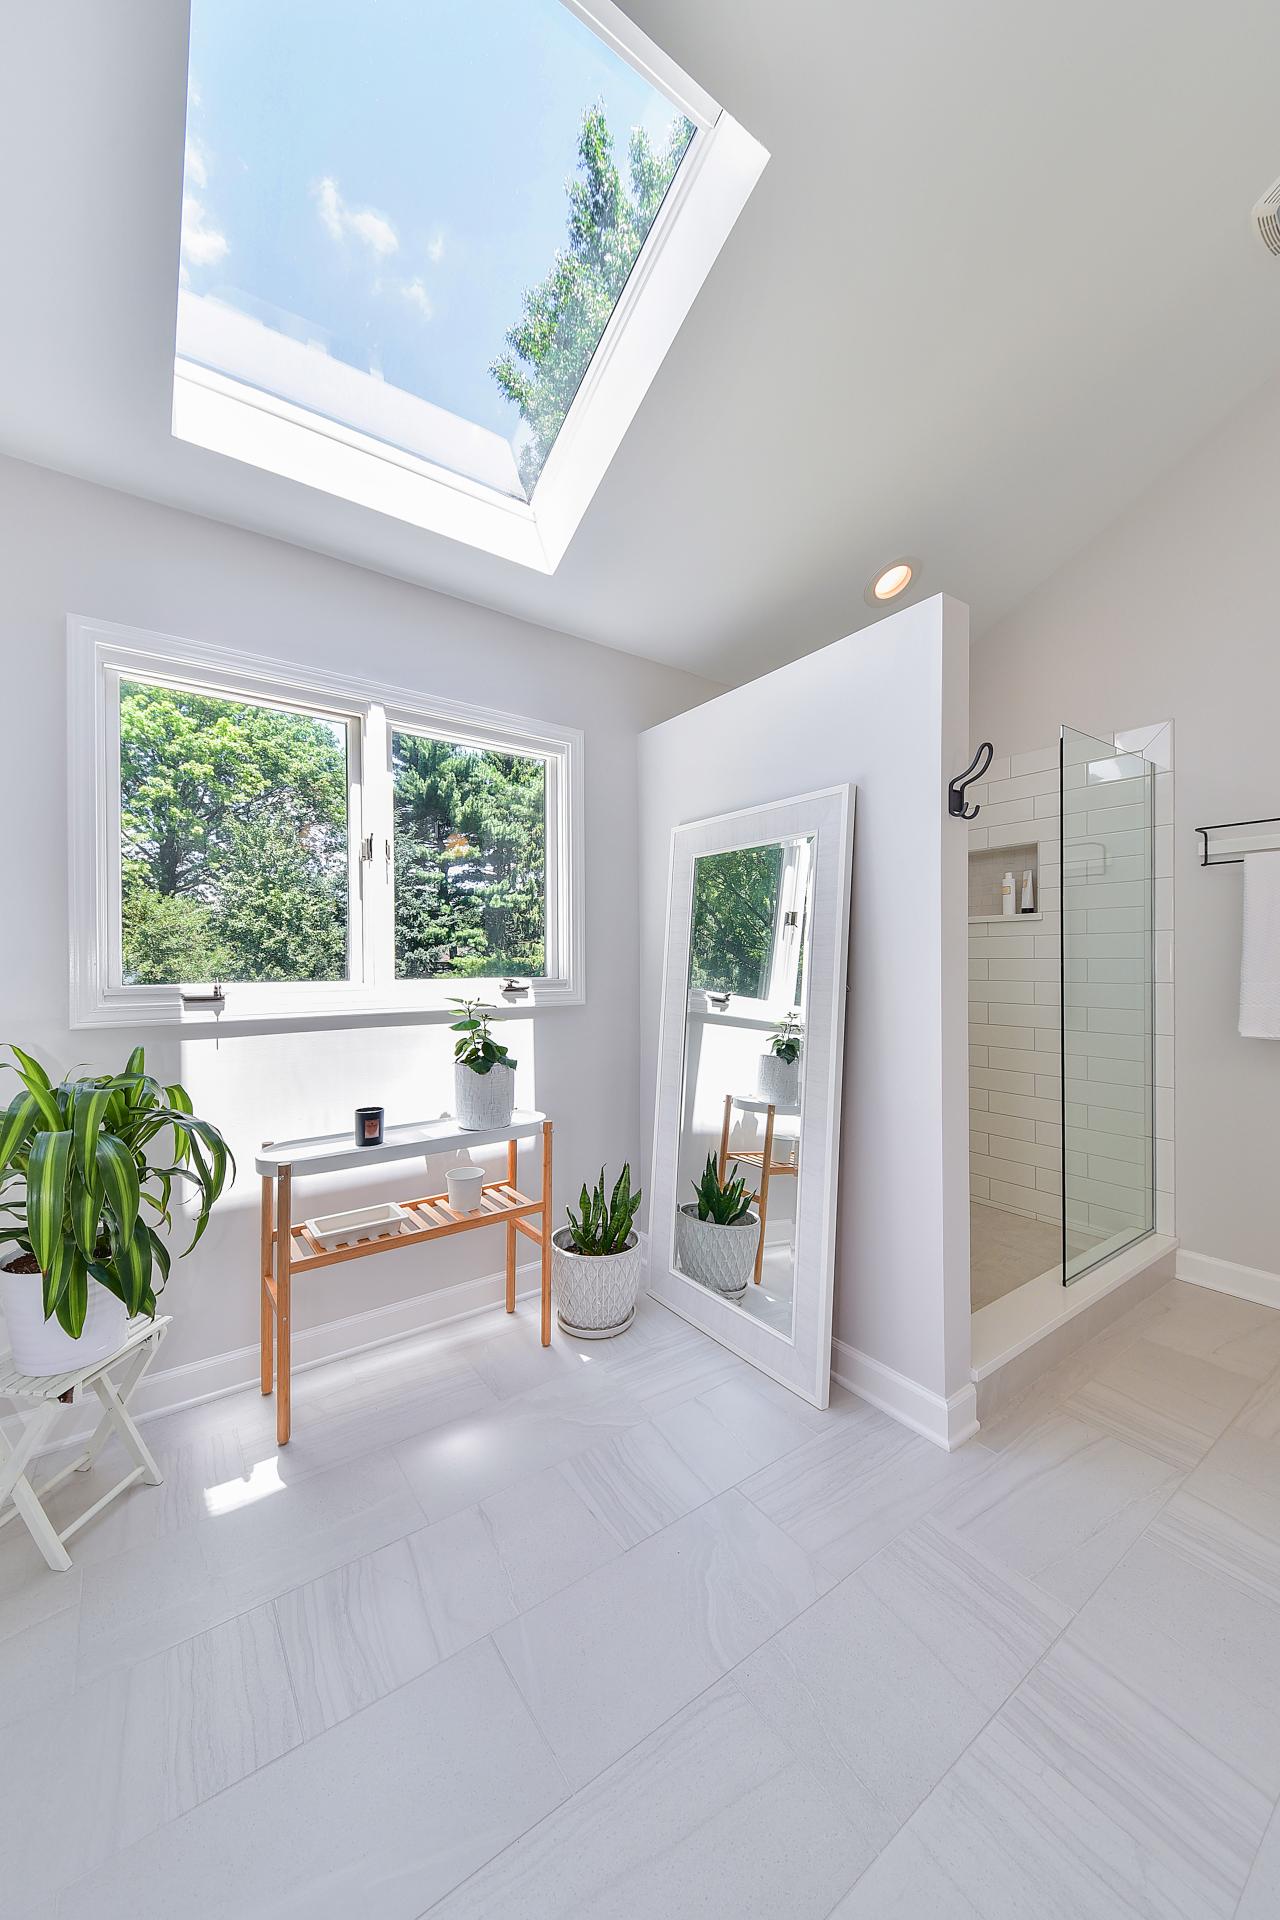 Top 4 Things To Know About Skylight Installations